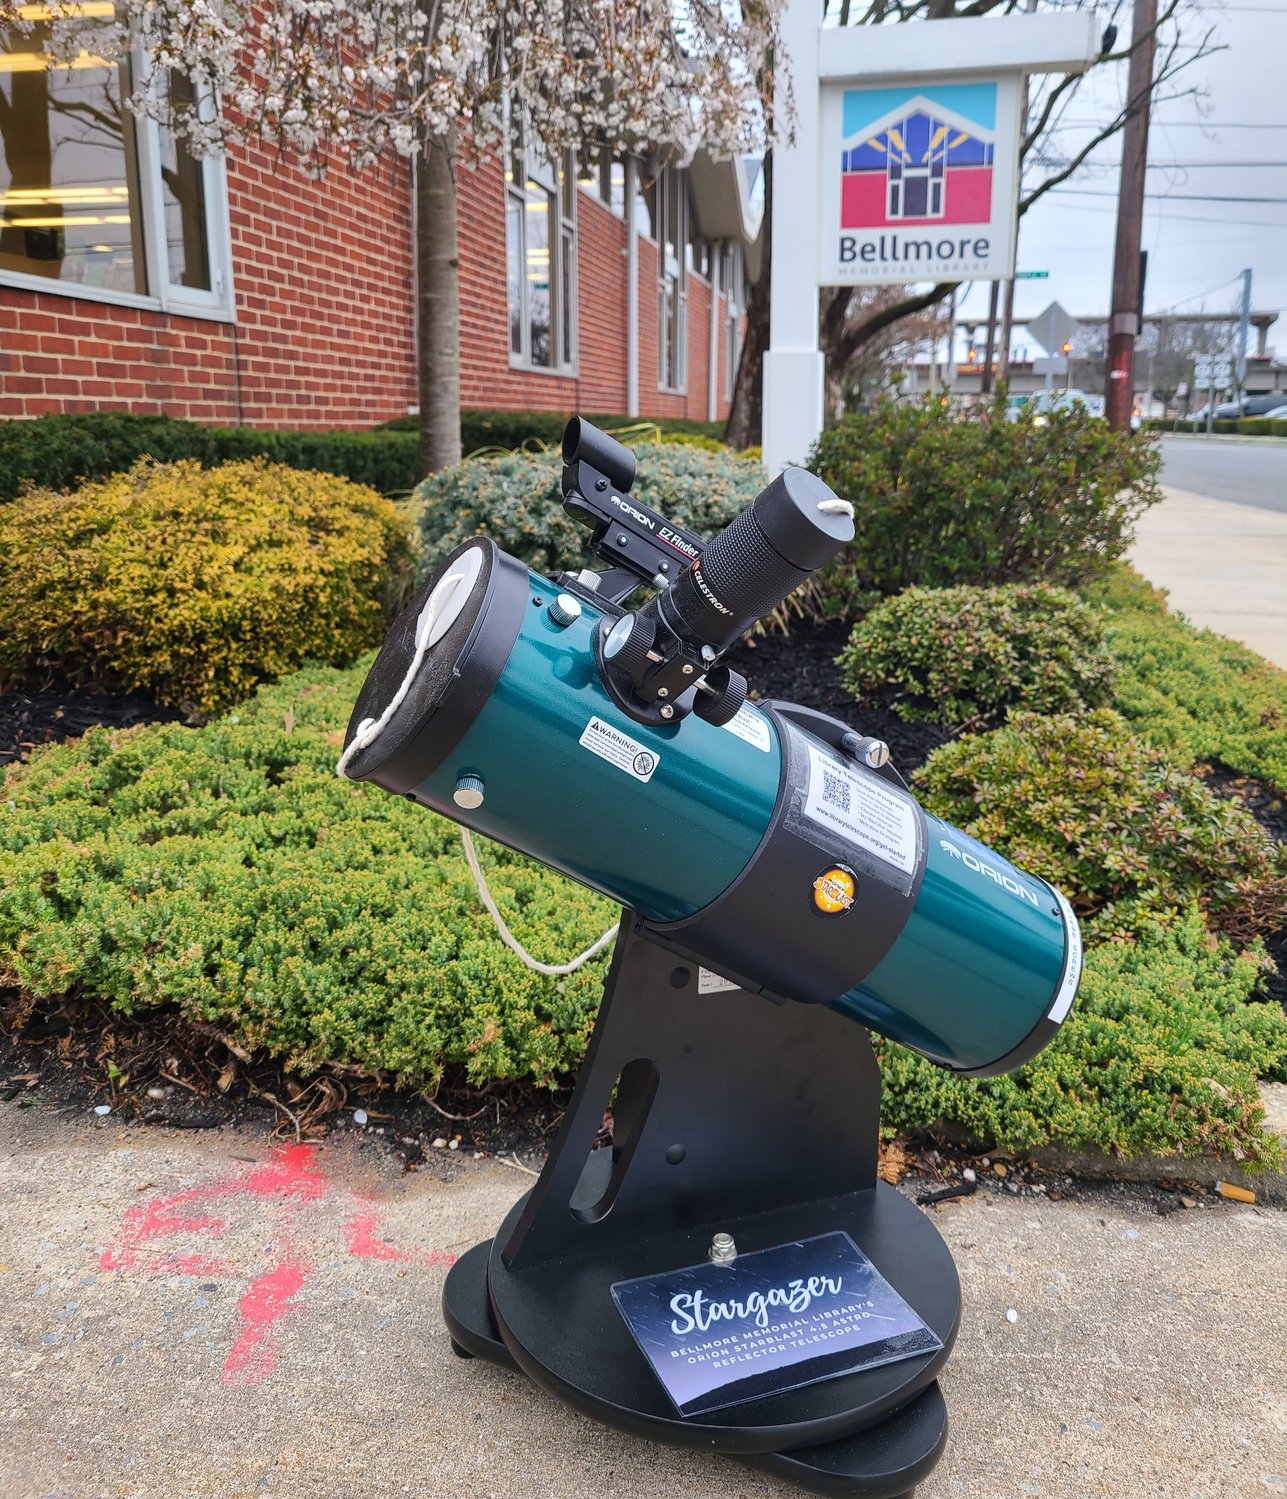 For the past eight years, Tom Lynch, an amateur astronomer, has been working with Nassau County libraries to help them purchase and maintain easy-to-use telescopes. At both of Bellmore’s libraries, cardholders in good standing can sign one out — just like a book — and explore the night sky at home.